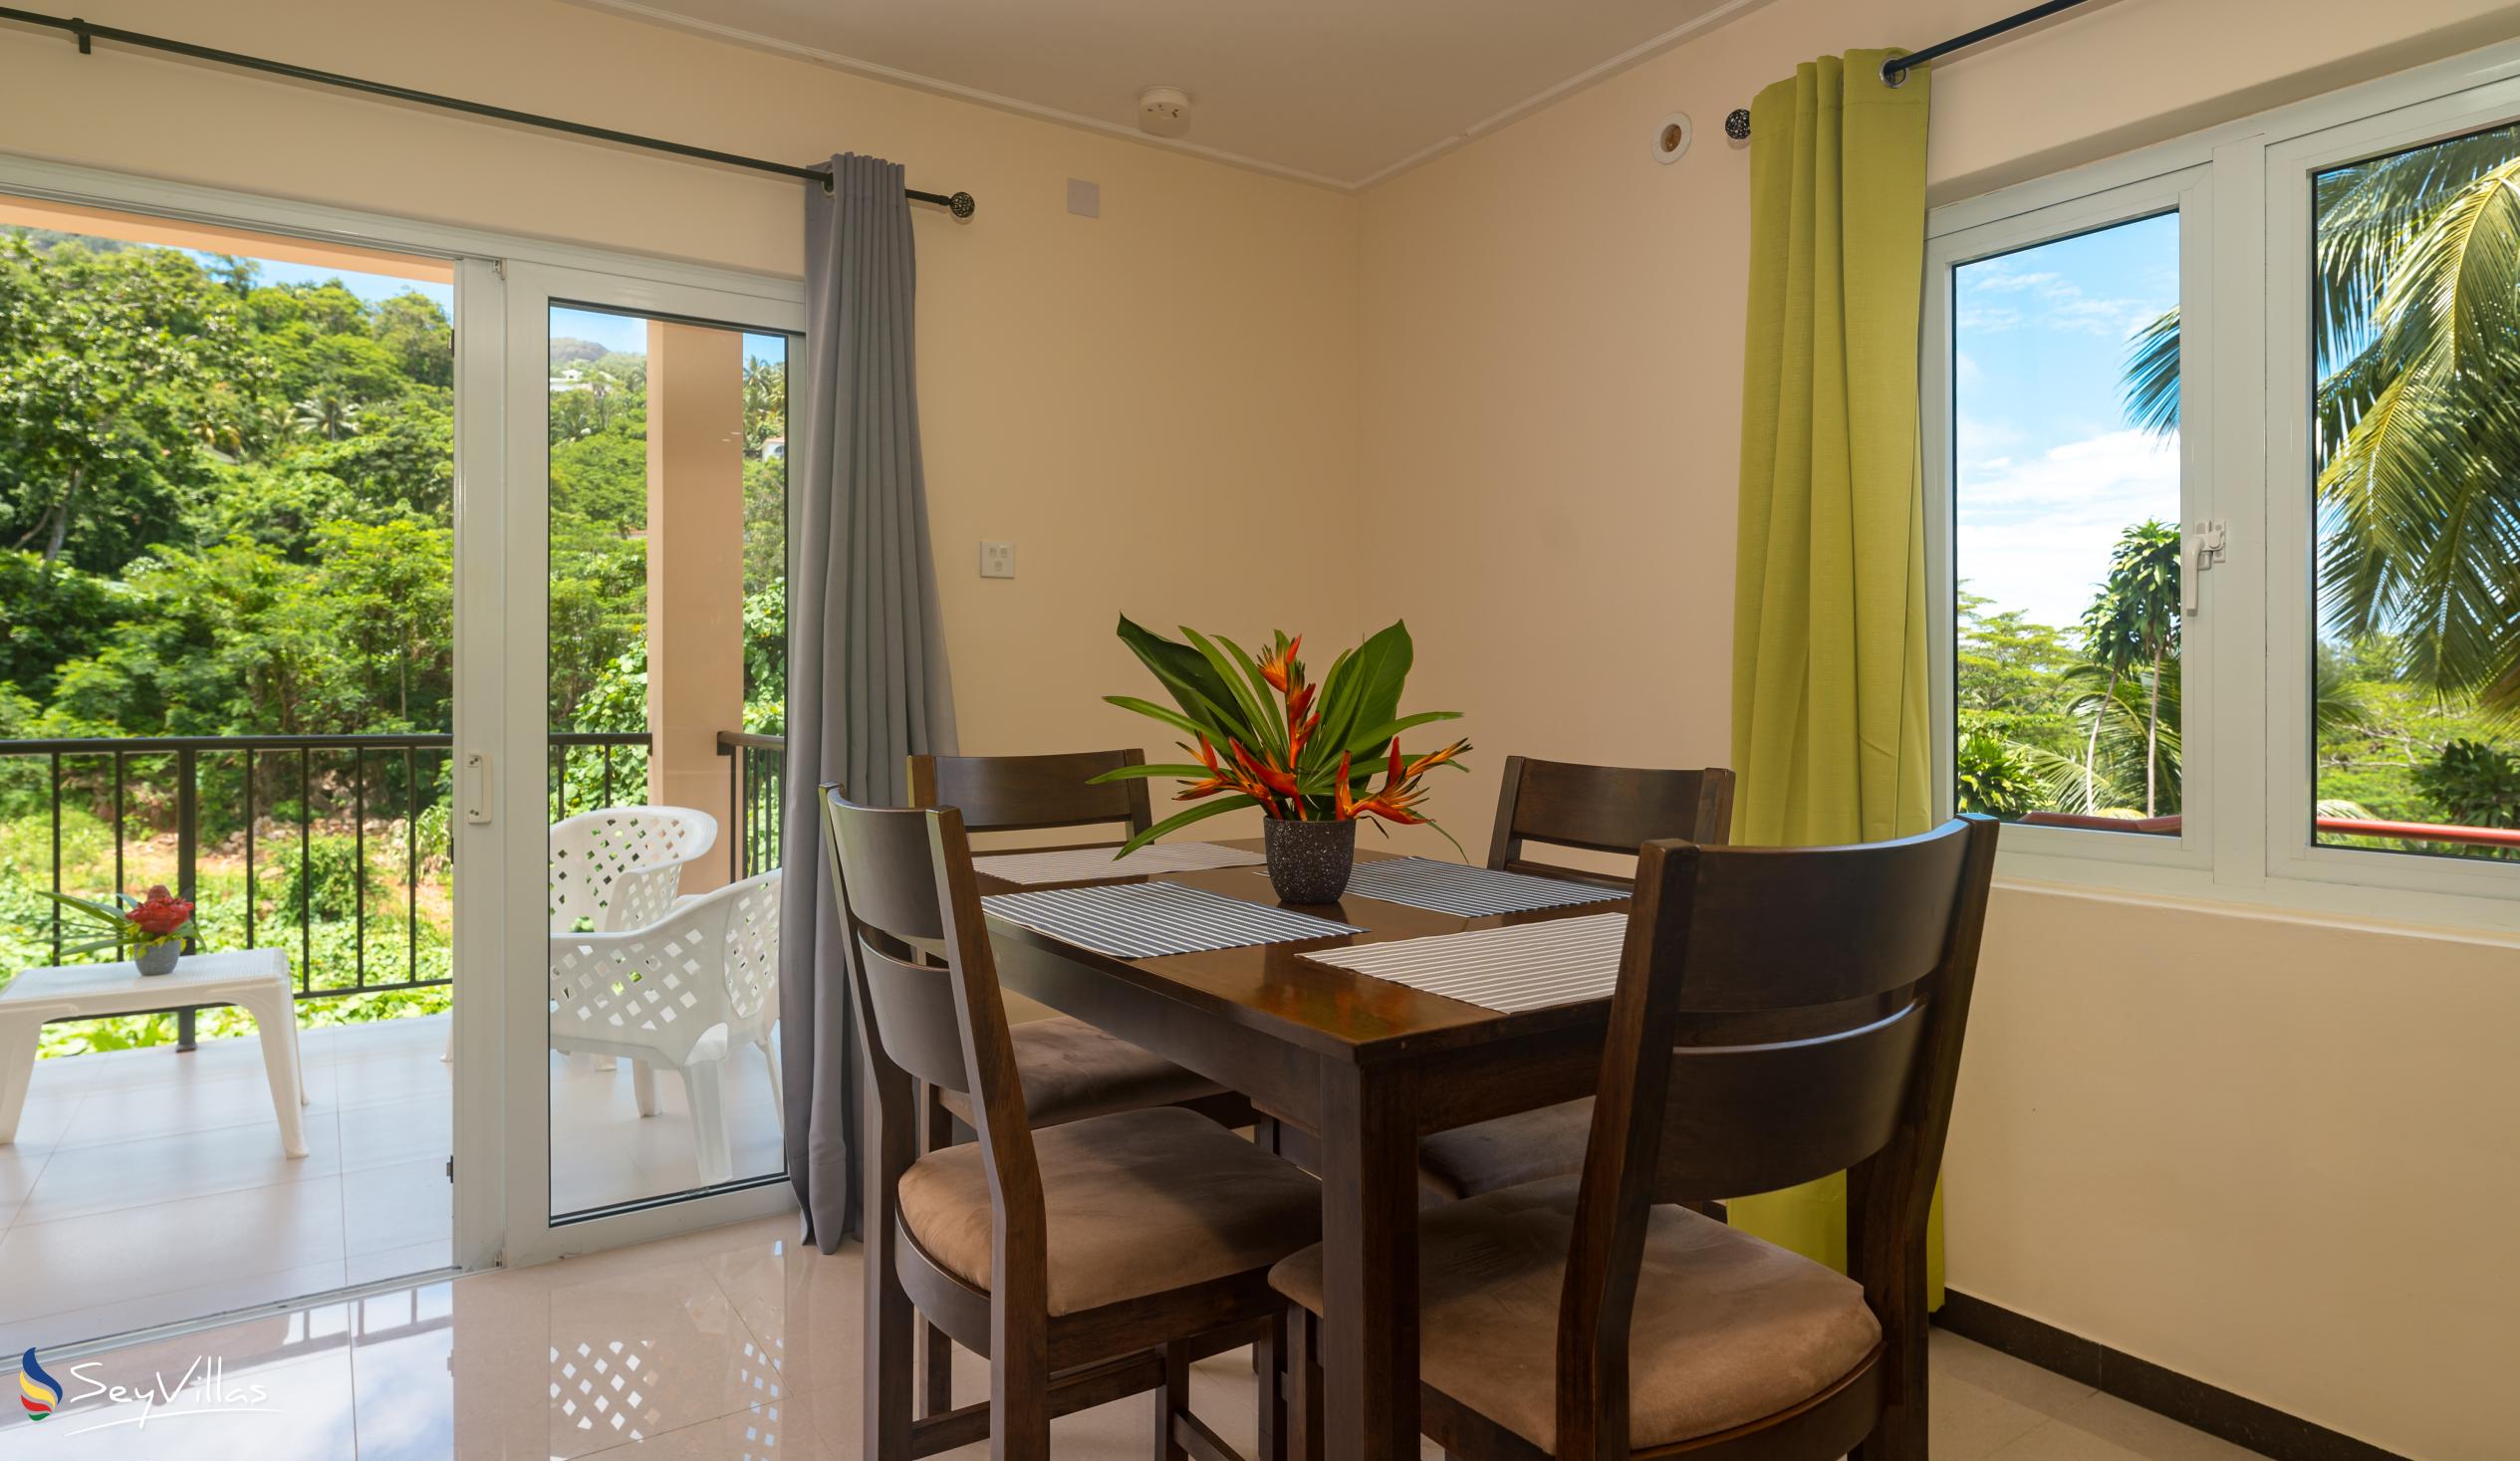 Foto 40: JAIDSS Holiday Apartments - Appartement 2 chambres - Mahé (Seychelles)